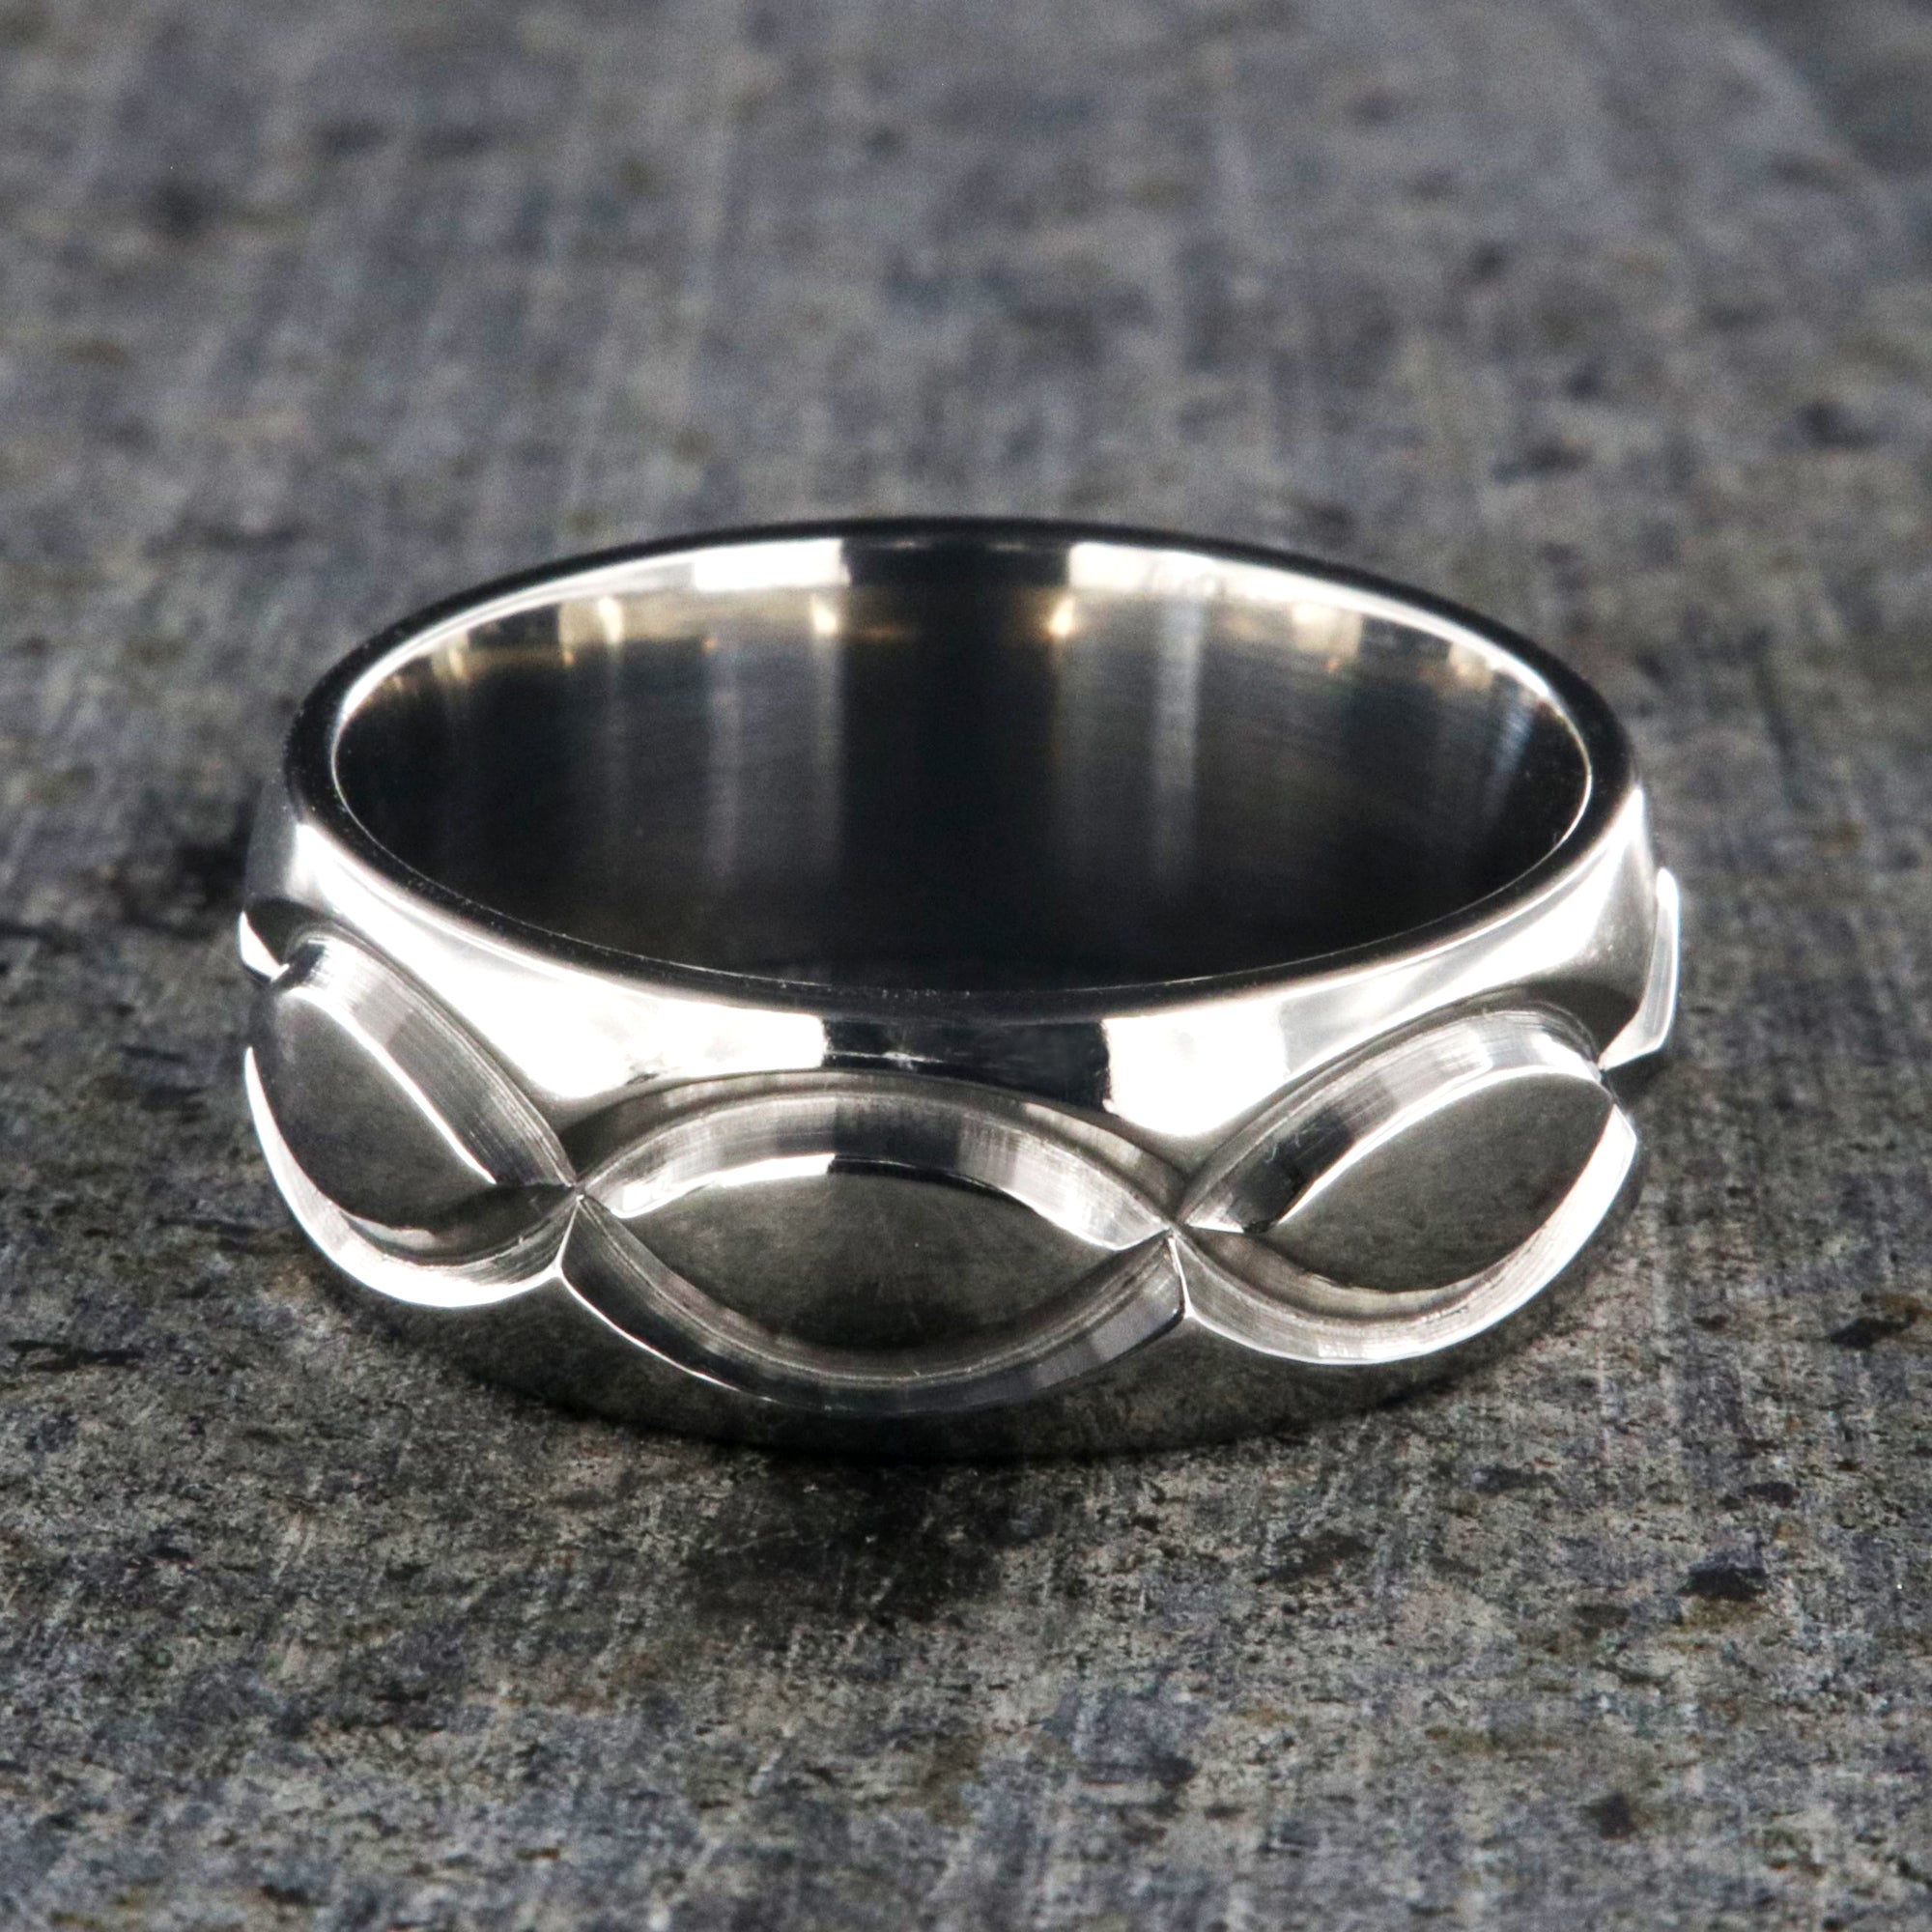 8mm wide titanium wedding band with a milled infinity design and rounded profile